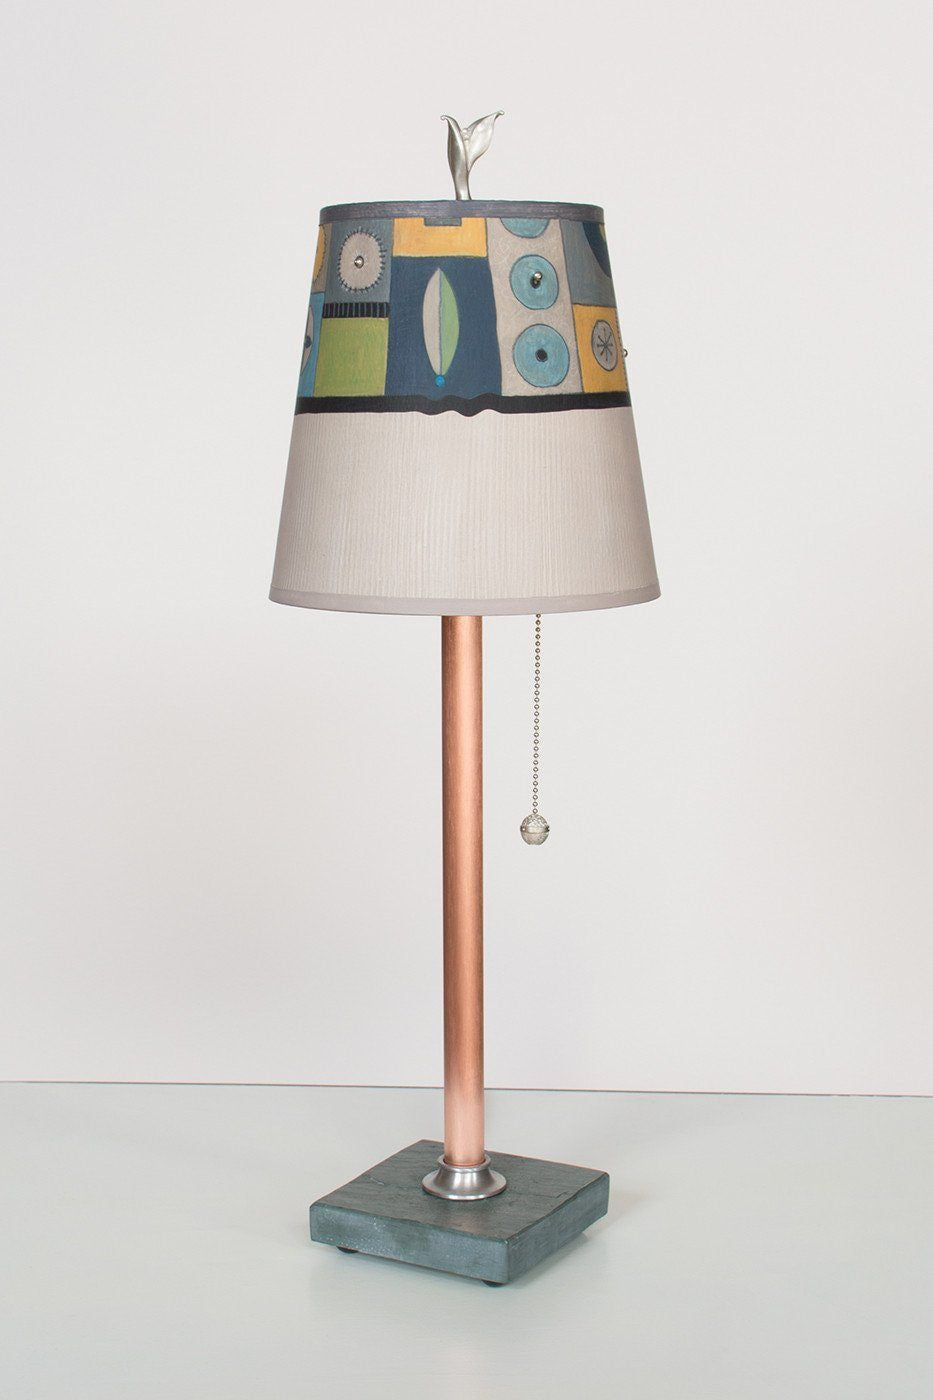 Janna Ugone & Co Table Lamps Copper Table Lamp with Small Drum Shade in Lucky Mosaic Oyster